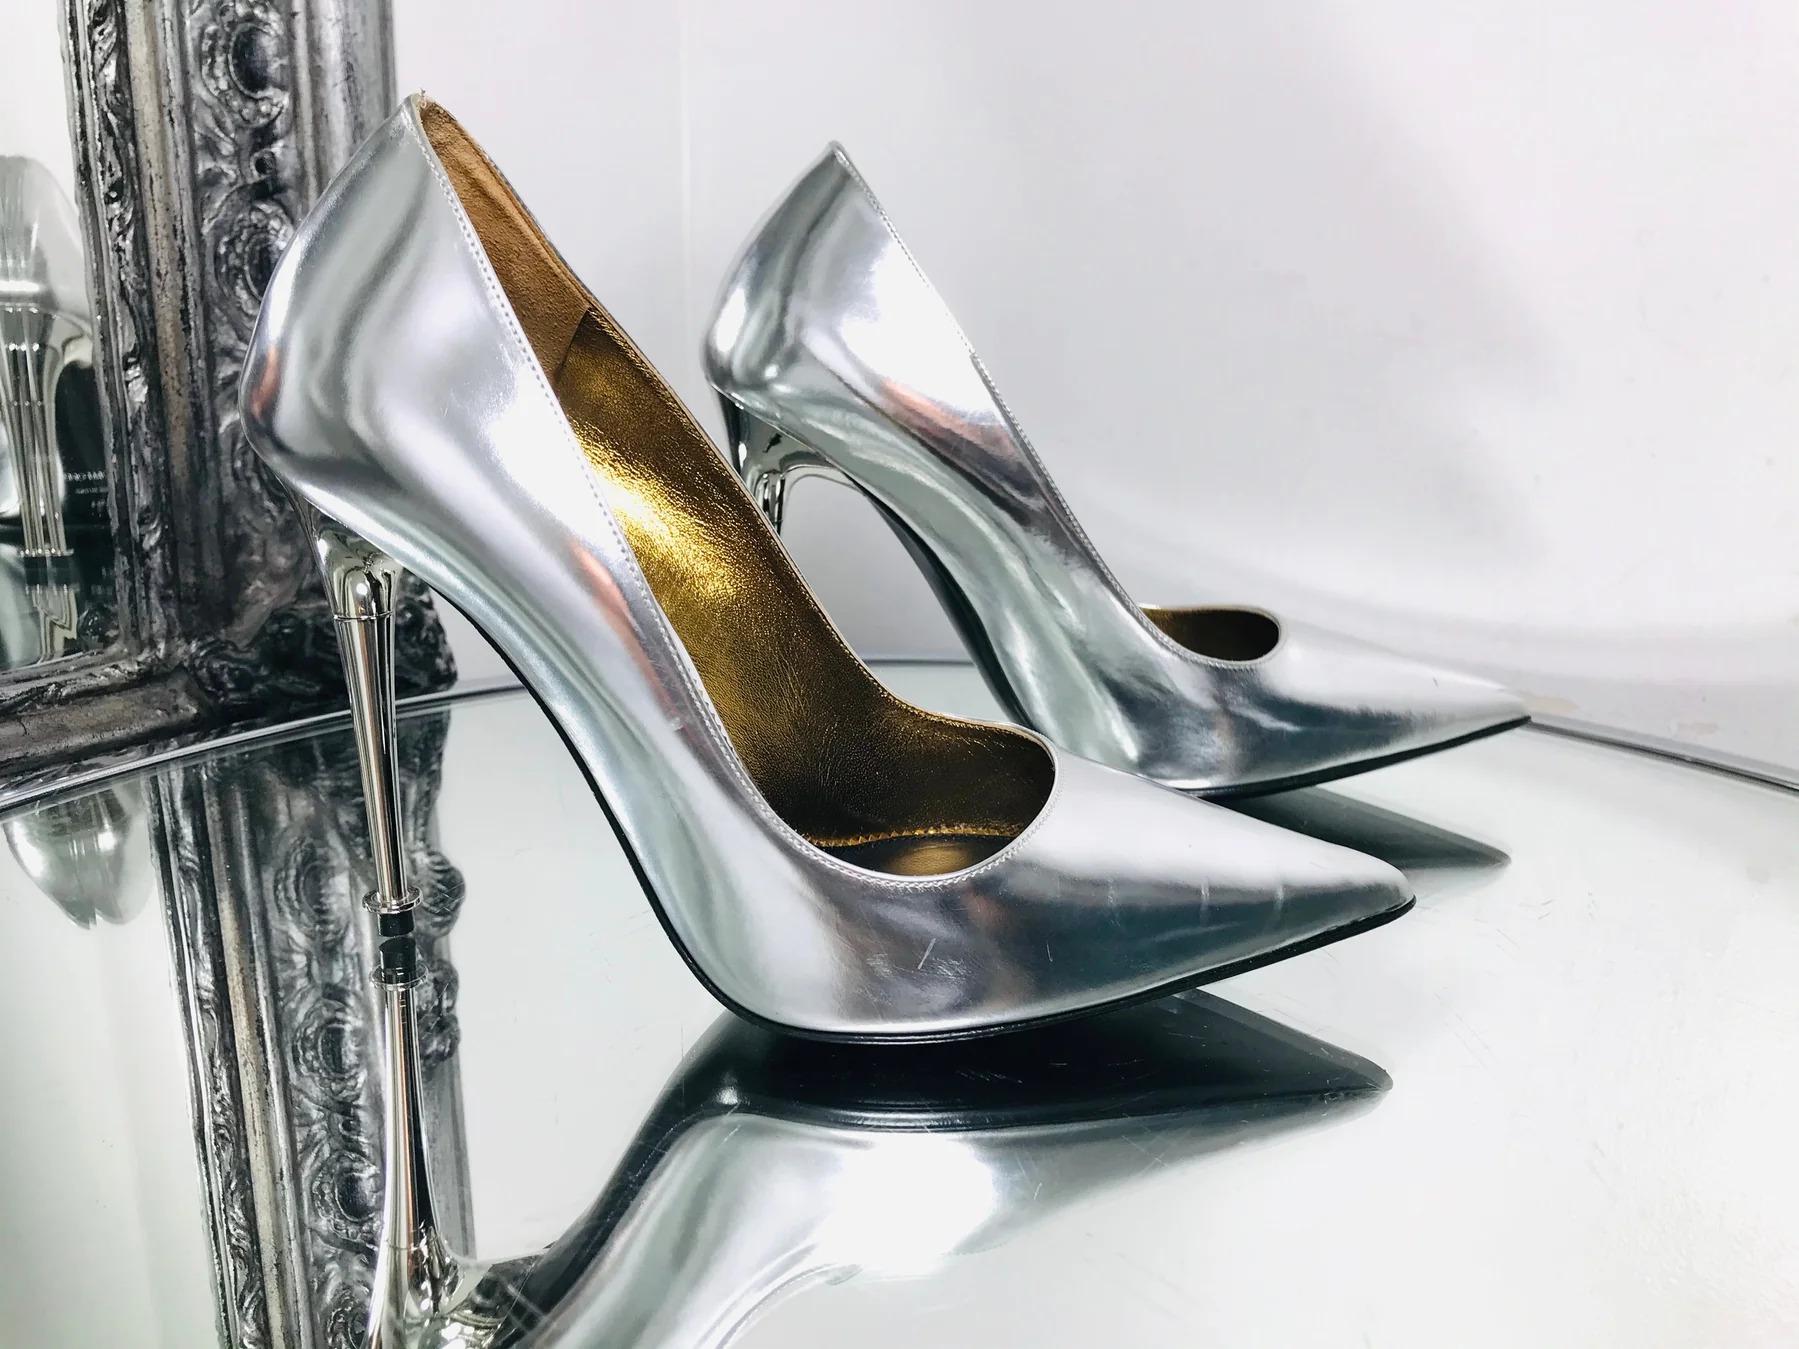 Tom Ford Metallic Leather Pumps In Excellent Condition For Sale In London, GB